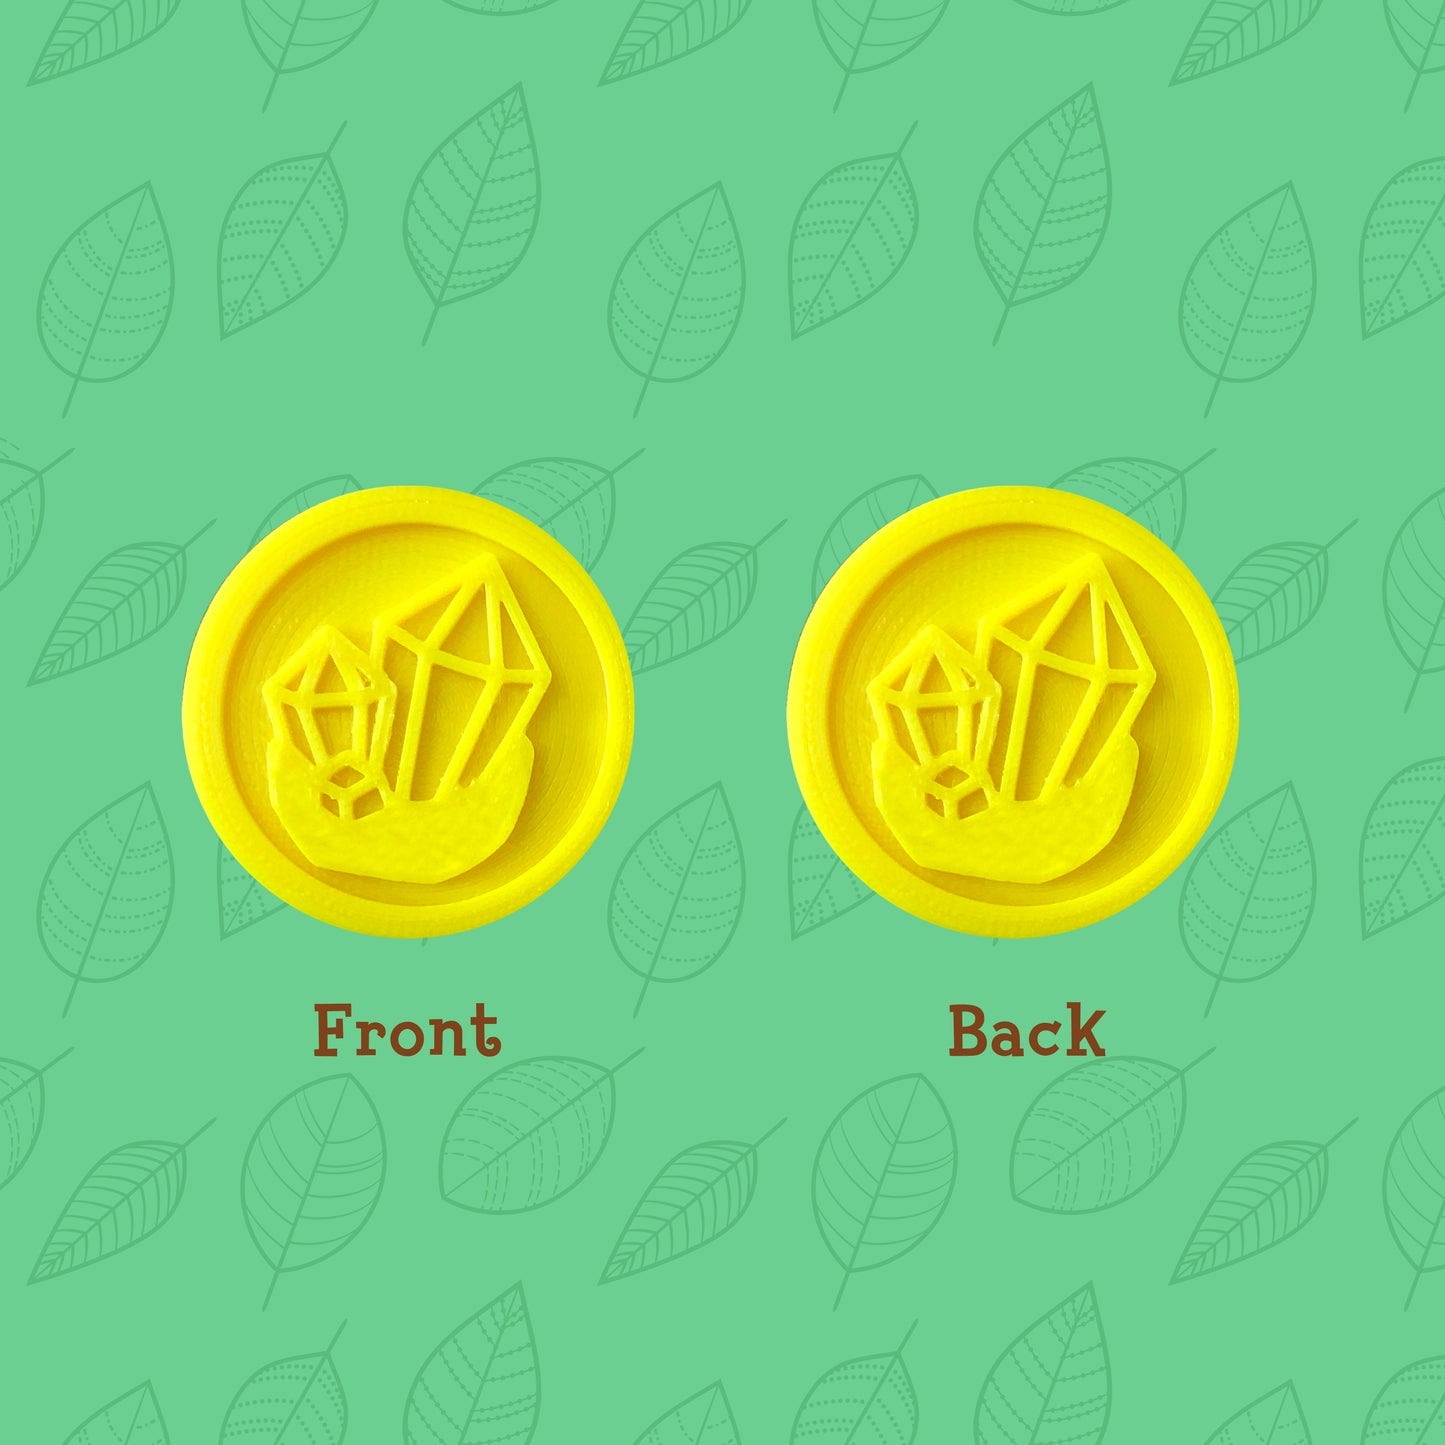 Animal Crossing Replica Coins - Gold Icons